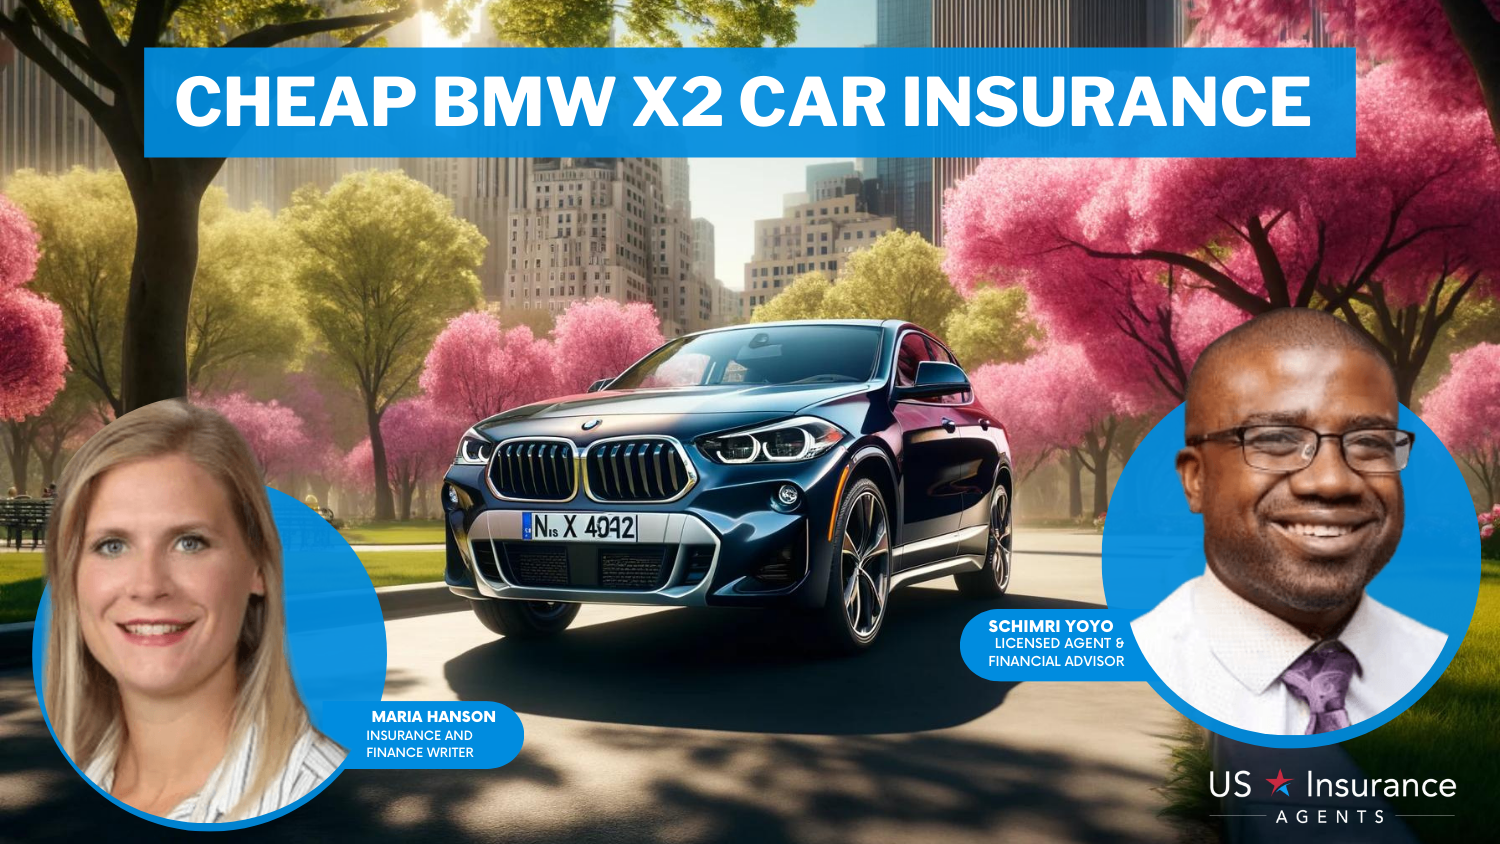 Cheap BMW X2 Car Insurance: Metromile, Safeco, and Allstate